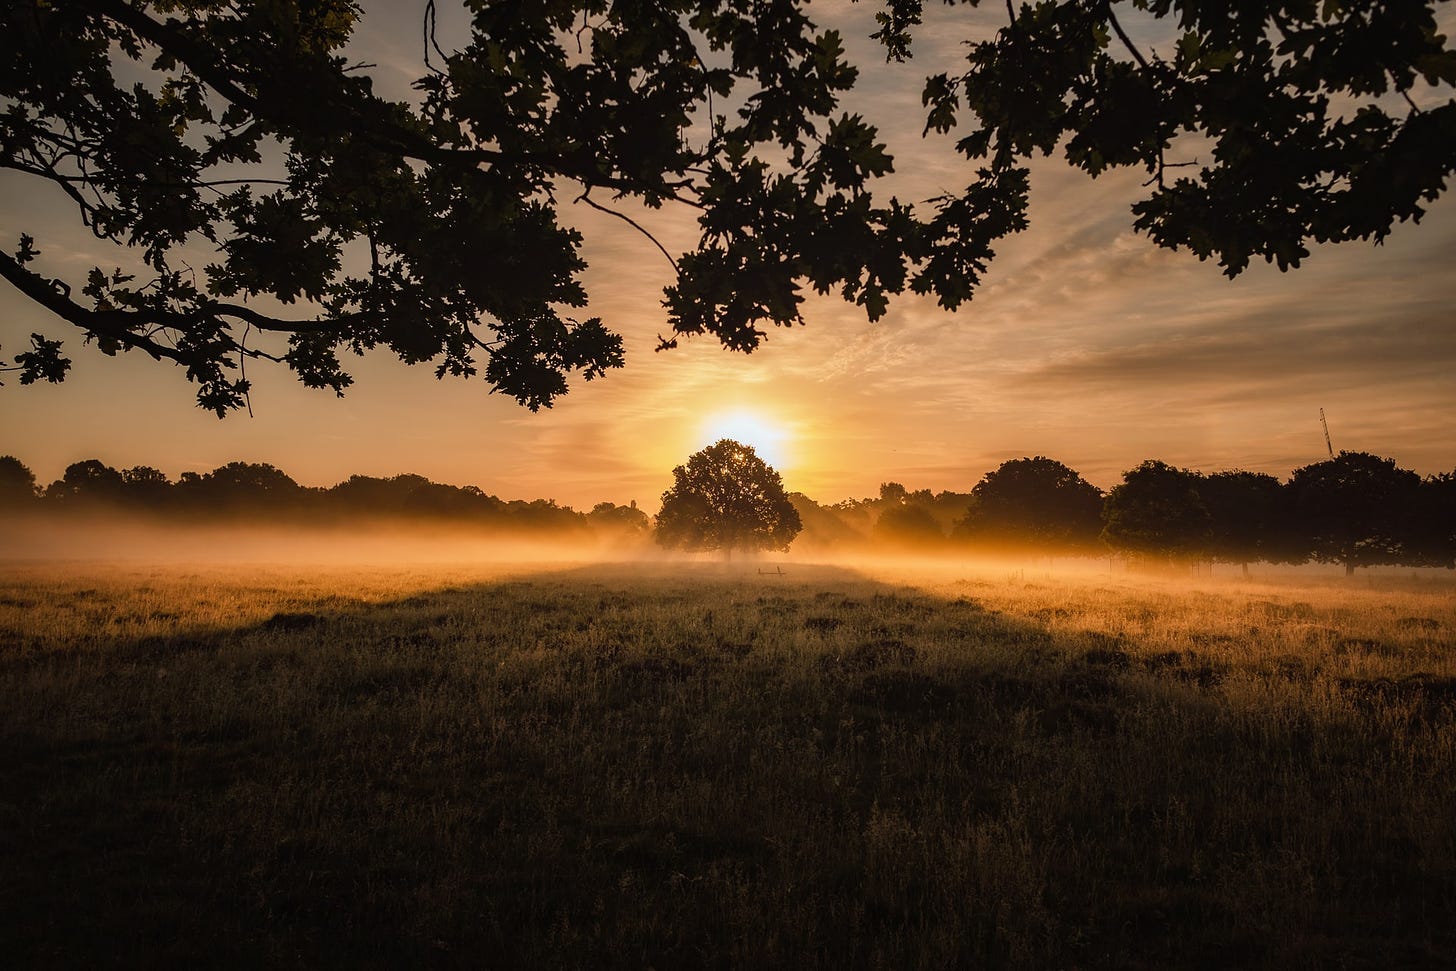 The sun rises behind a single tree in a countryside setting